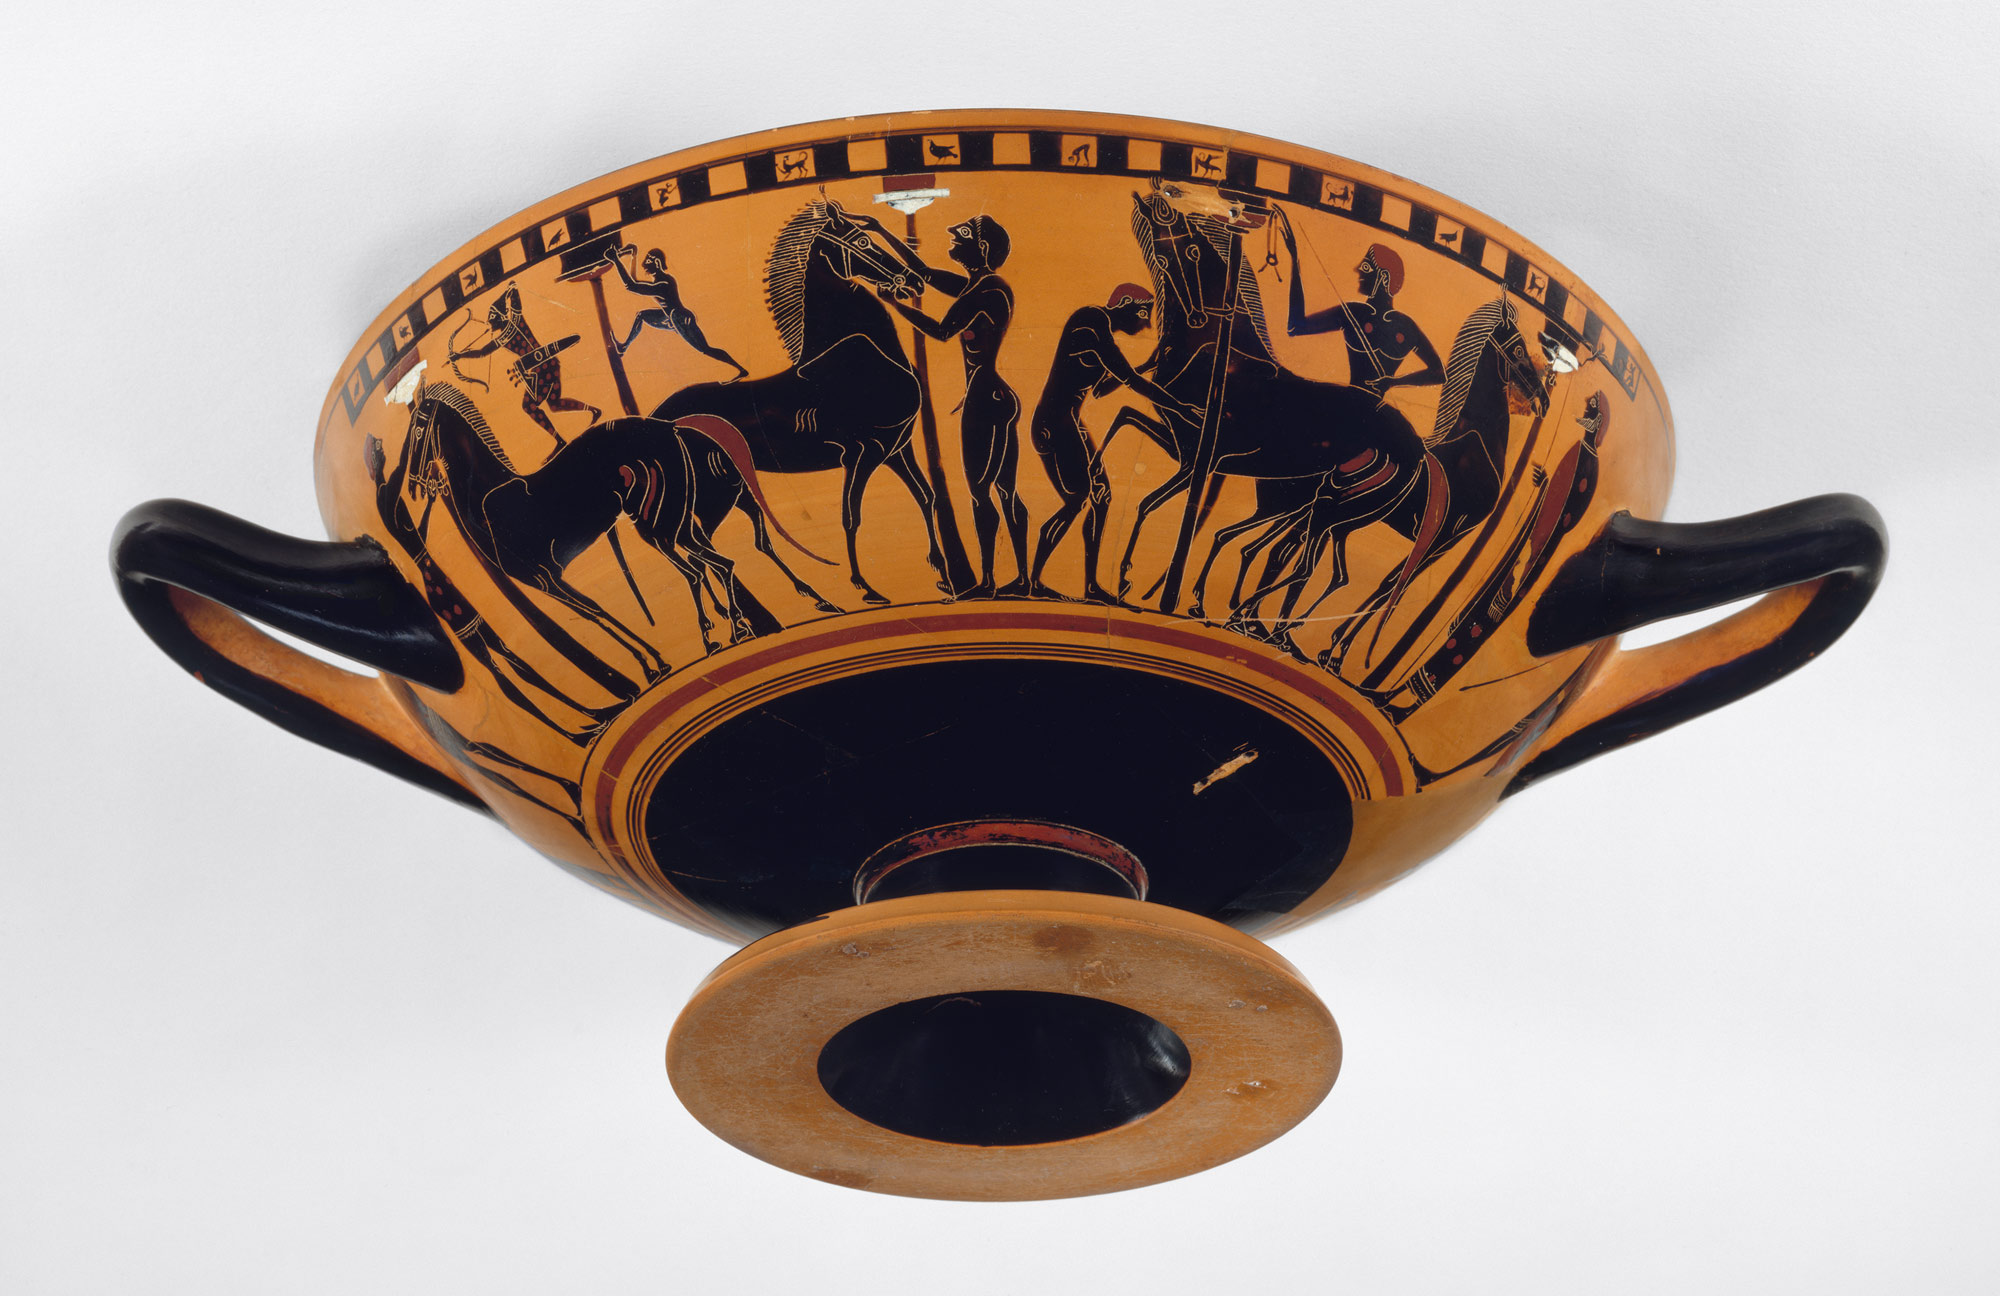 Terracotta Kylix Drinking Cup Attributed To The Amasis Painter Work Of Art